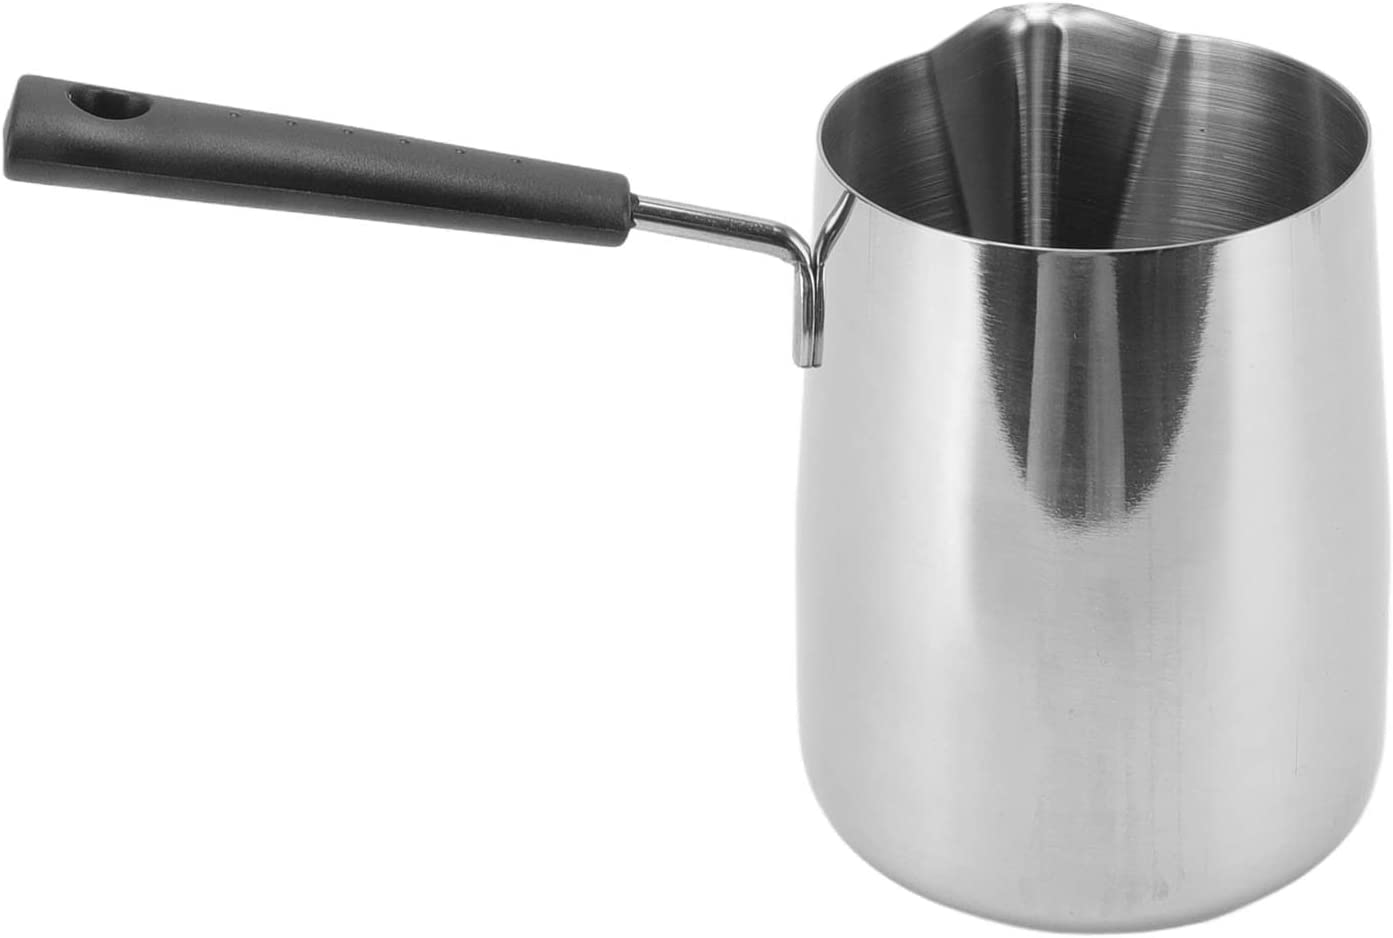 Qcwwy Coffee Toroid Jug with Long Handle, Rustproof Coffee Decanter Jug, Milk Frother Jug Stainless Steel 304 350ml Cappuccino Milk Frother Cup for Home Cafe Office (#3)